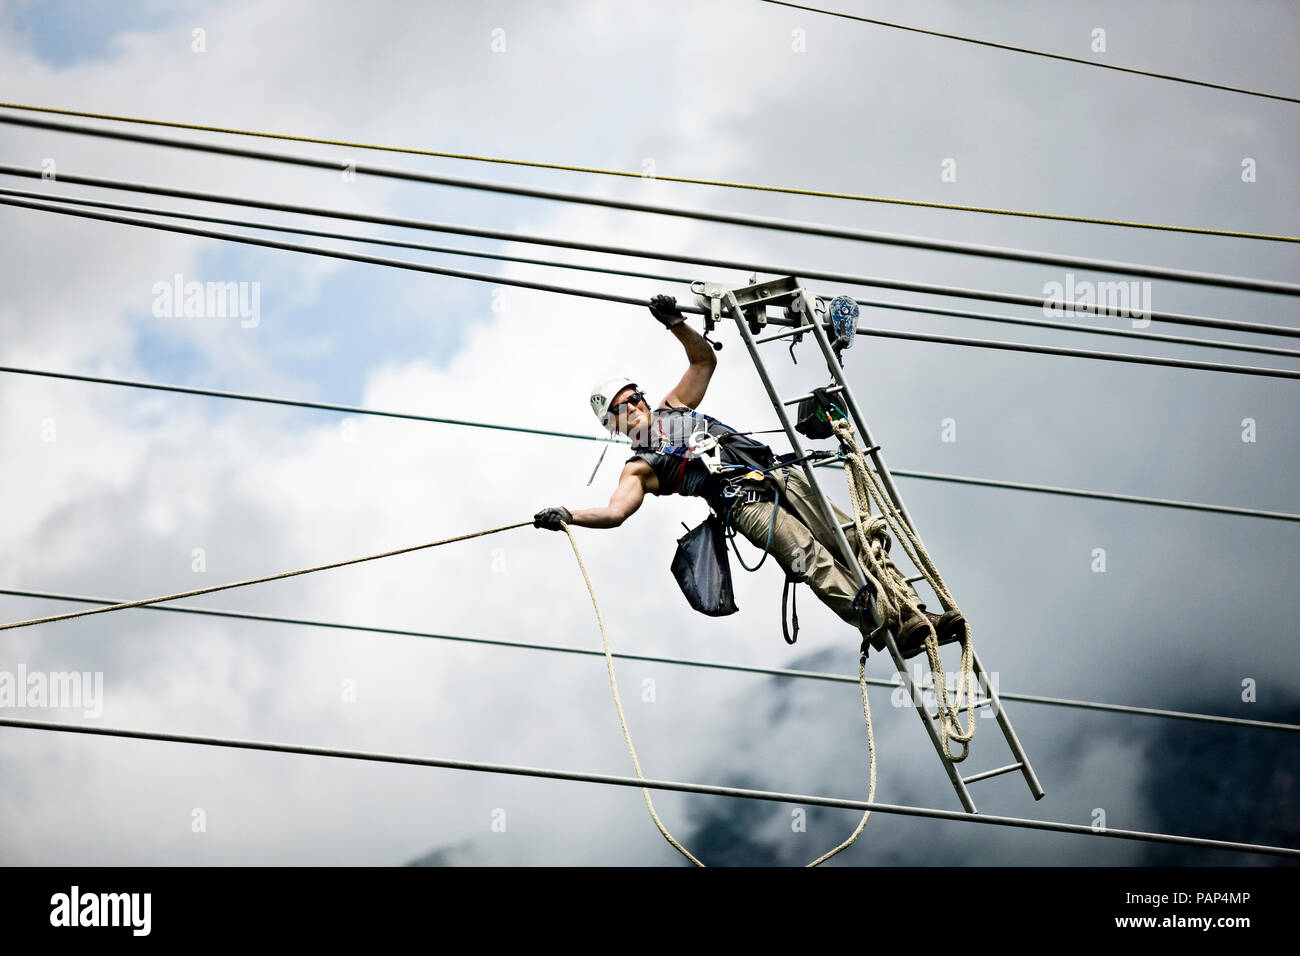 Fitter with ladder, pulling along high-voltage power line Stock Photo -  Alamy